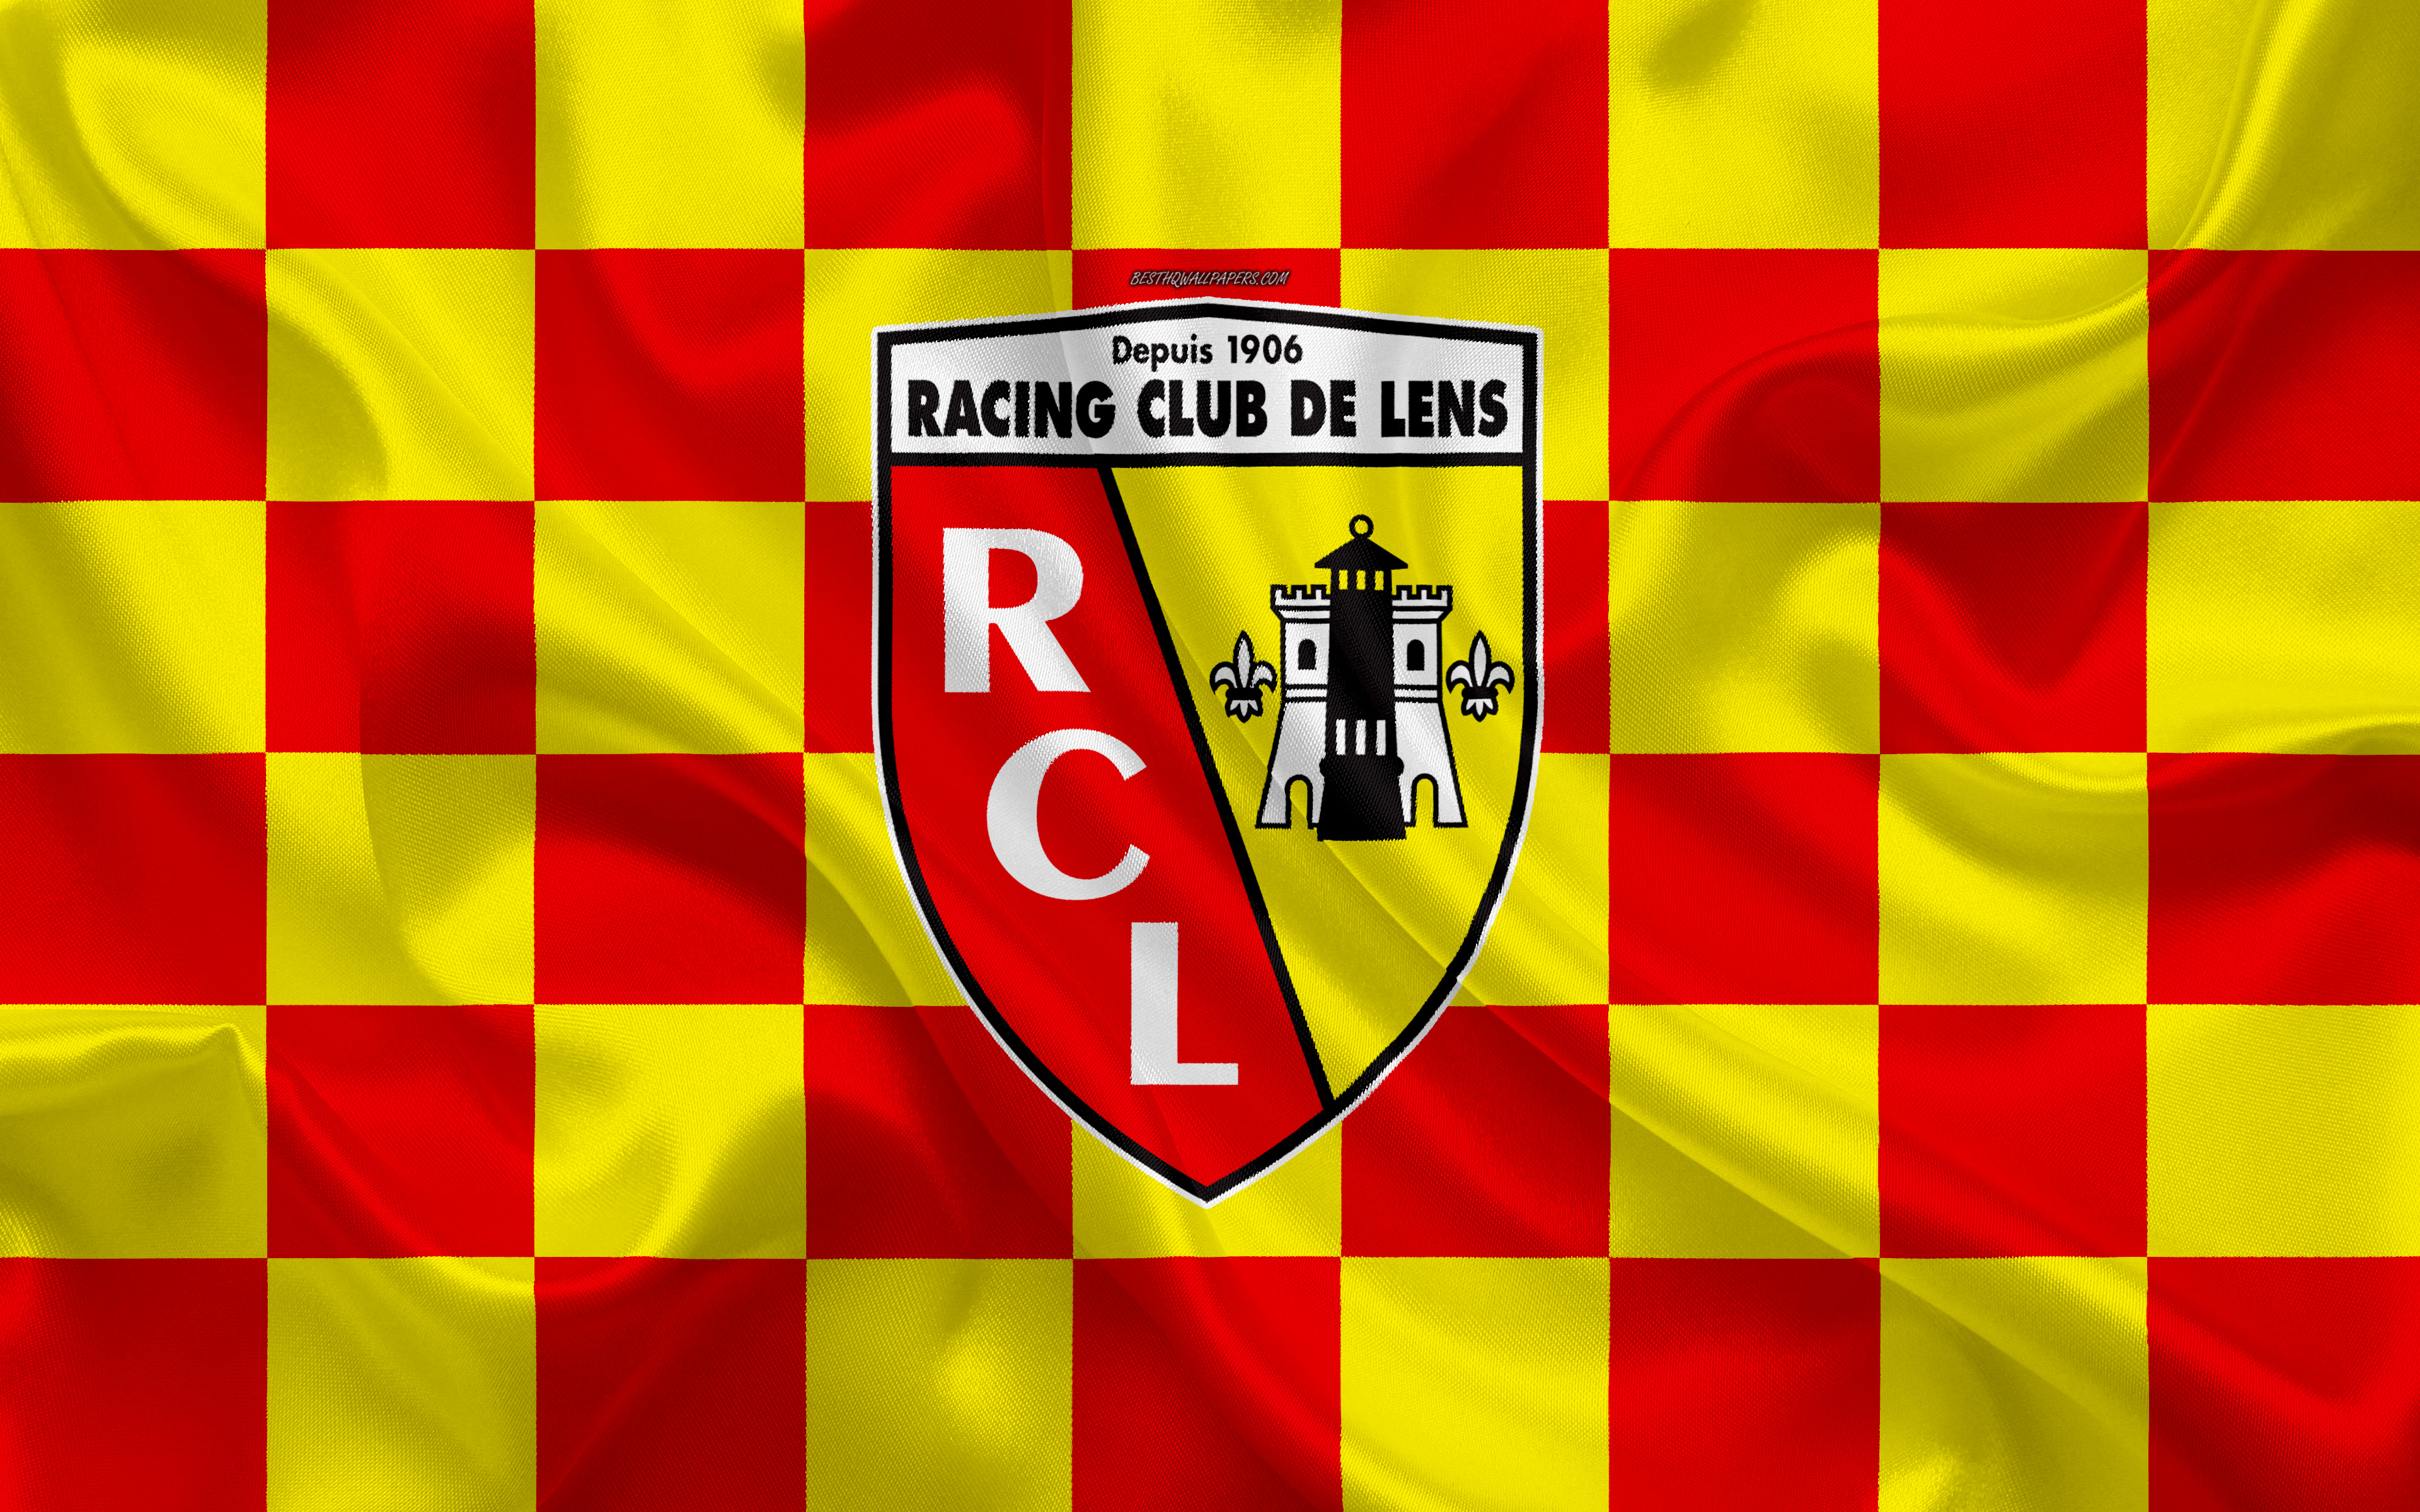 Download Wallpaper RC Lens, 4k, Logo, Creative Art, Yellow Red Checkered Flag, French Football Club, Ligue New Emblem, Silk Texture, Lens, France, Football For Desktop With Resolution 3840x2400. High Quality HD Picture